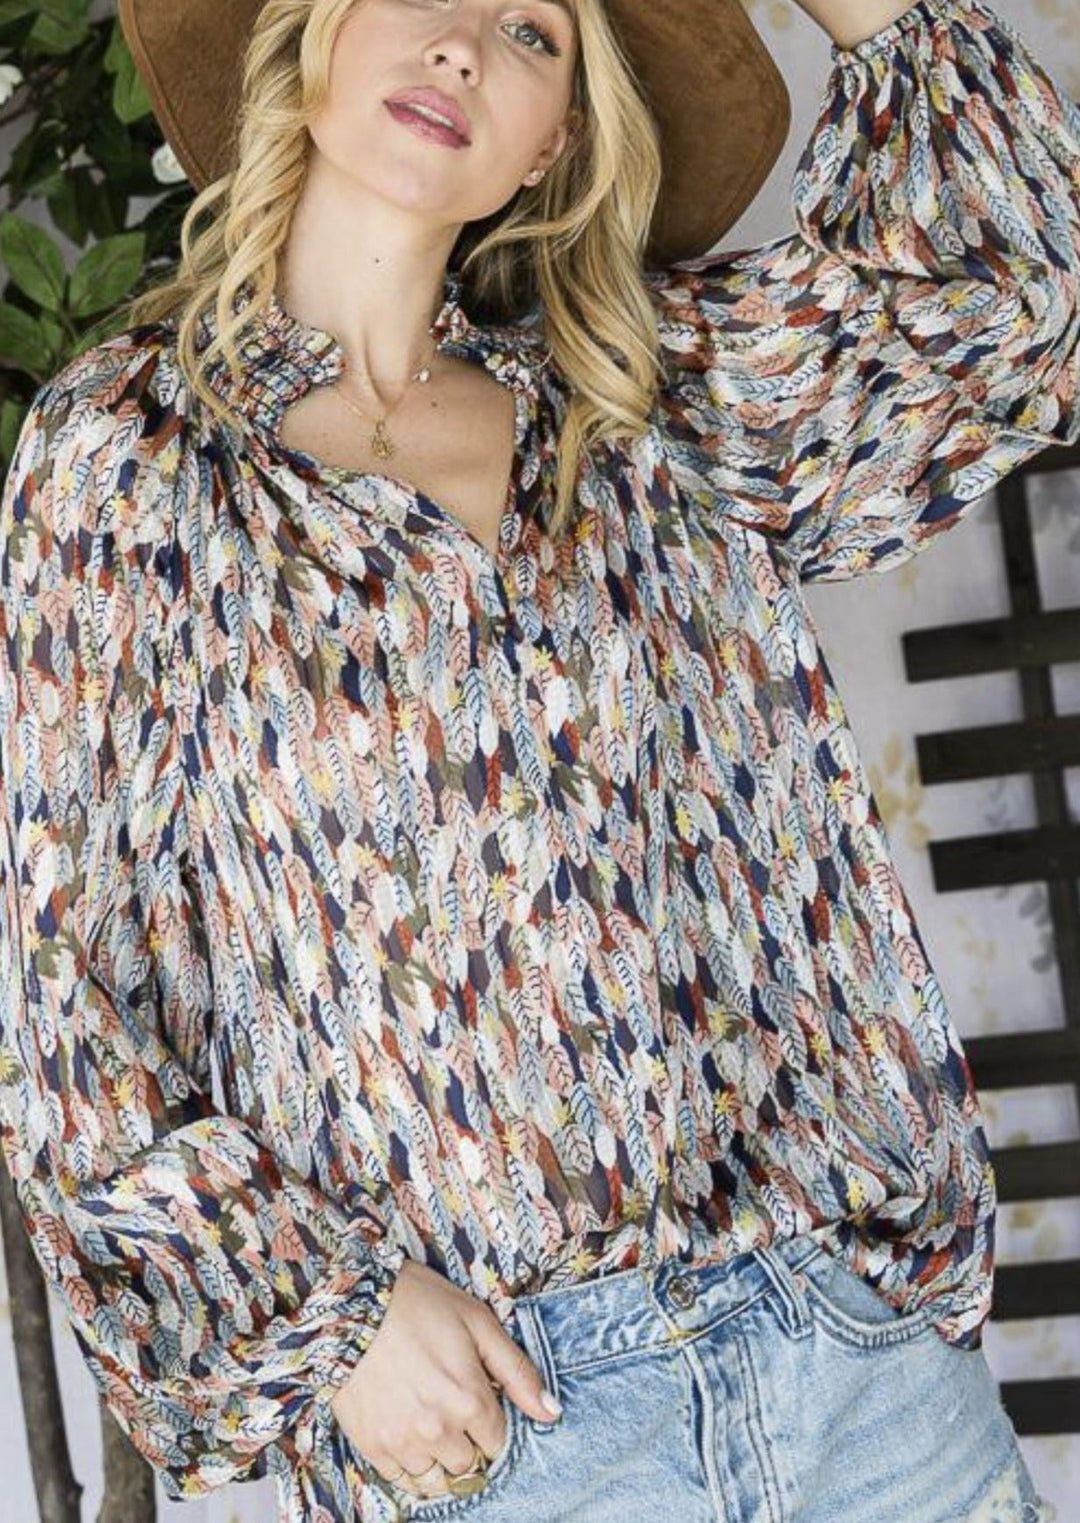 Made in USA |  Smocked Collar Colorful Feather Print Chiffon Blouse | Brand: Bucket List | Style # T1048 | Classy Cozy Cool Women’s Clothing Boutique